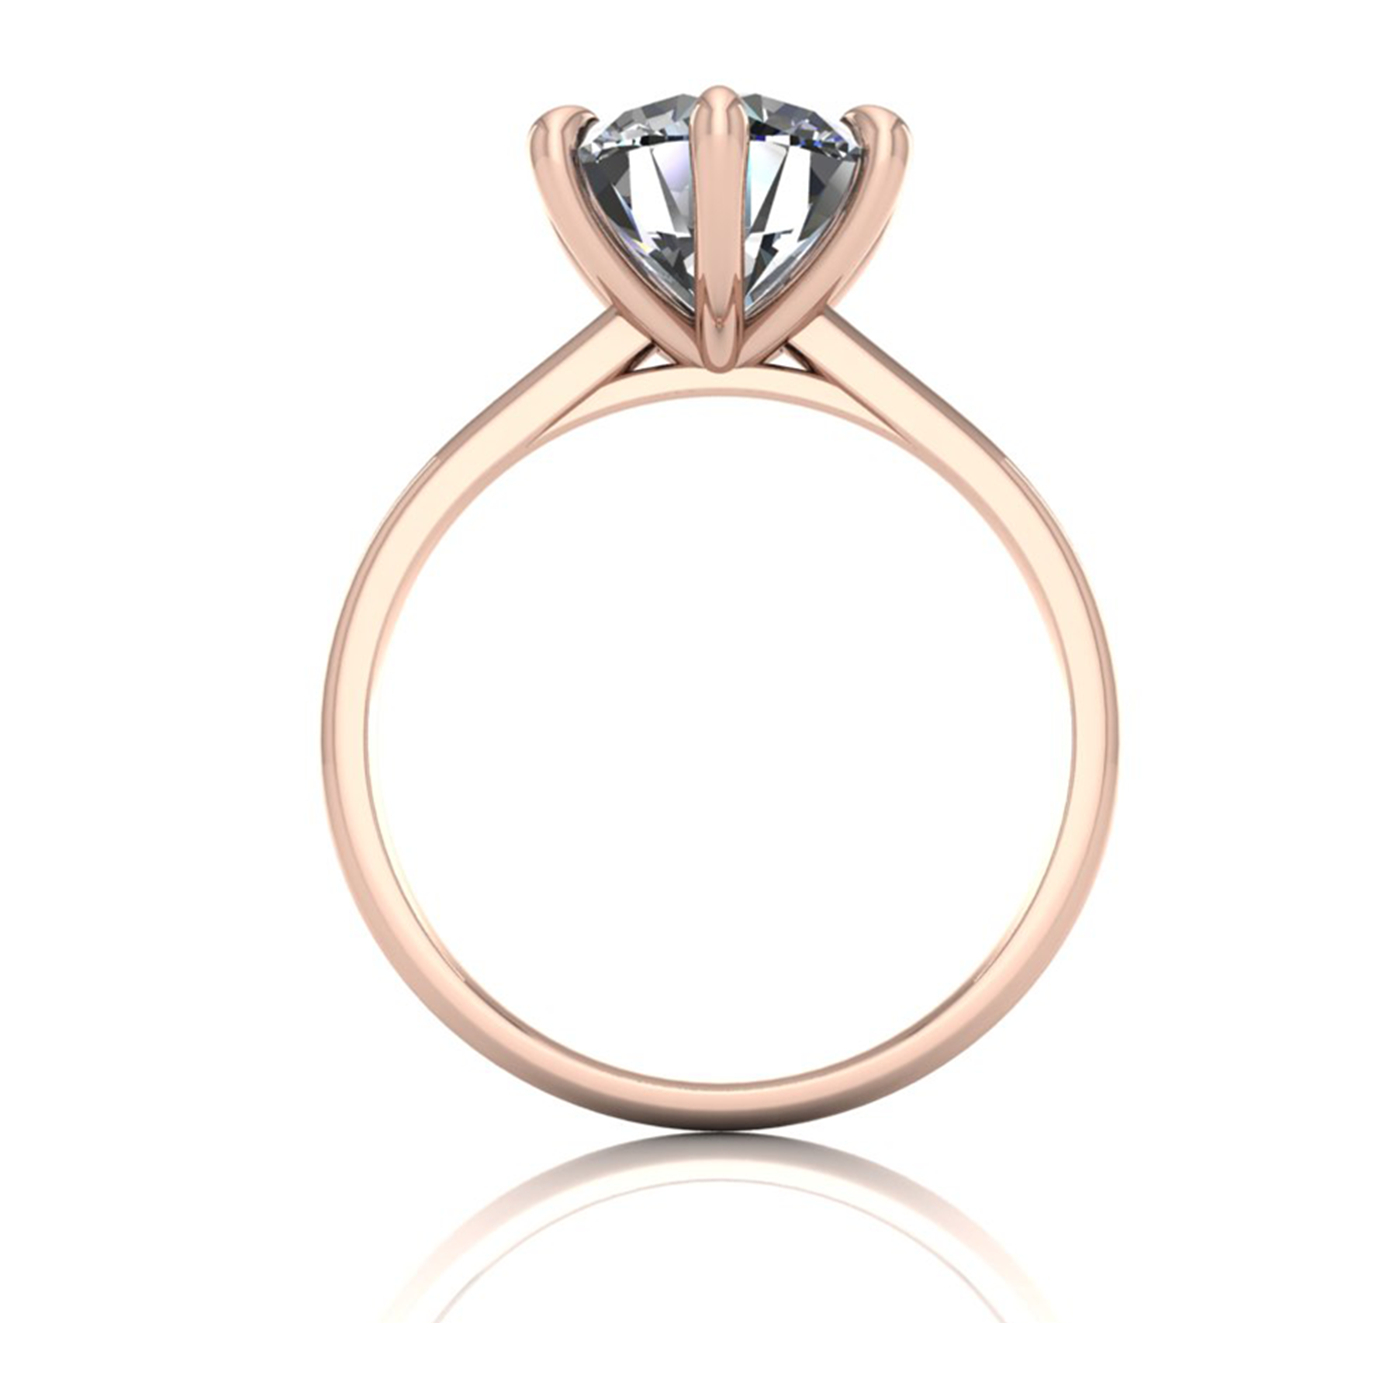 18k rose gold 2,50 ct 6 prongs solitaire round cut diamond engagement ring with whisper thin band